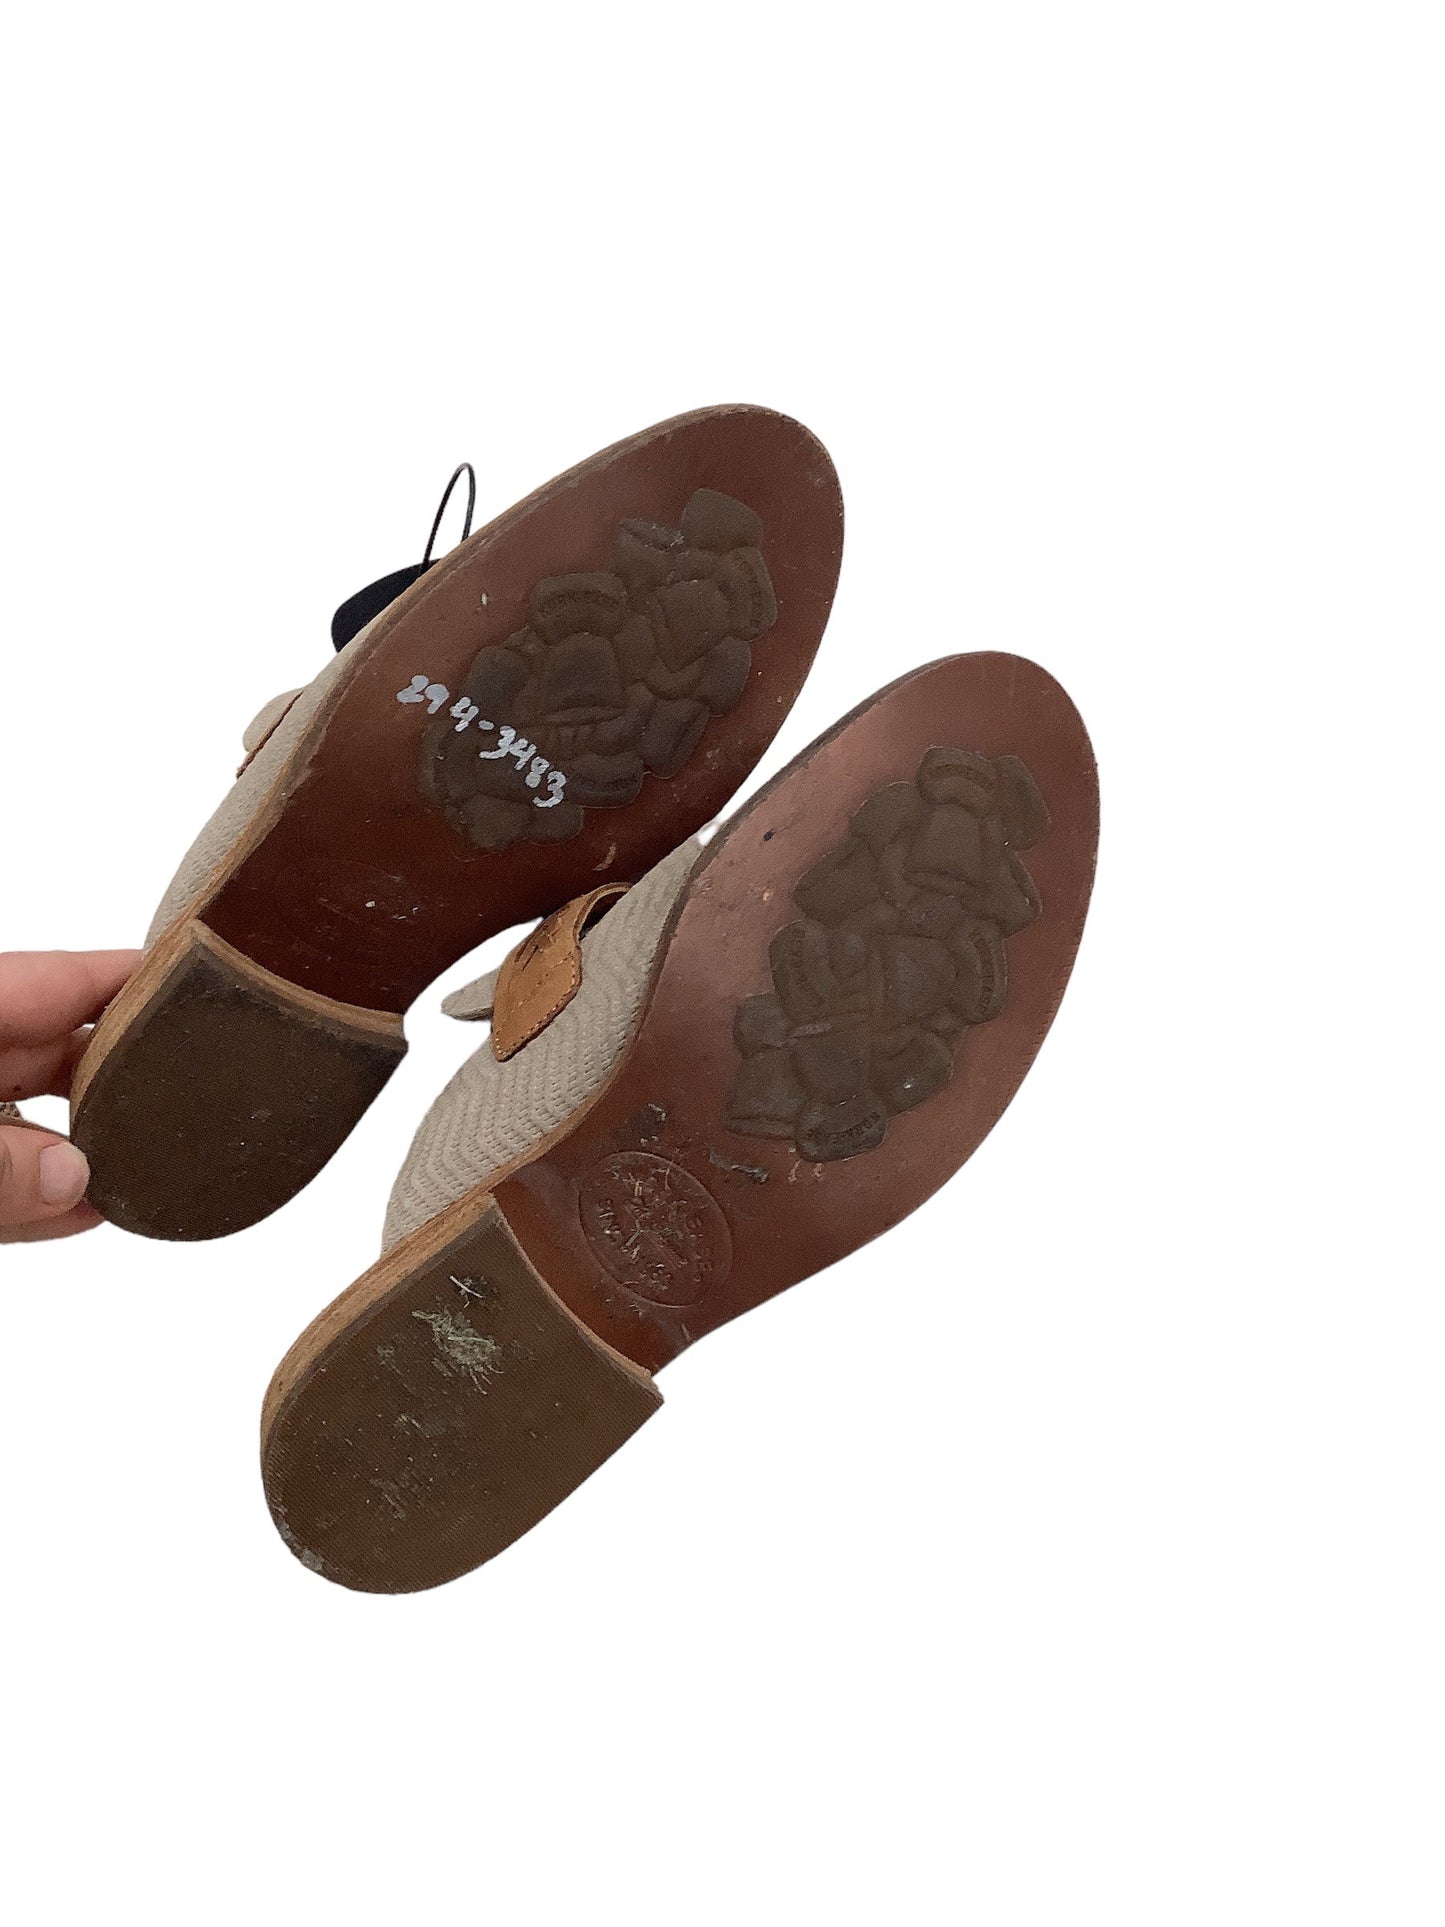 Shoes Flats By Kork Ease  Size: 6